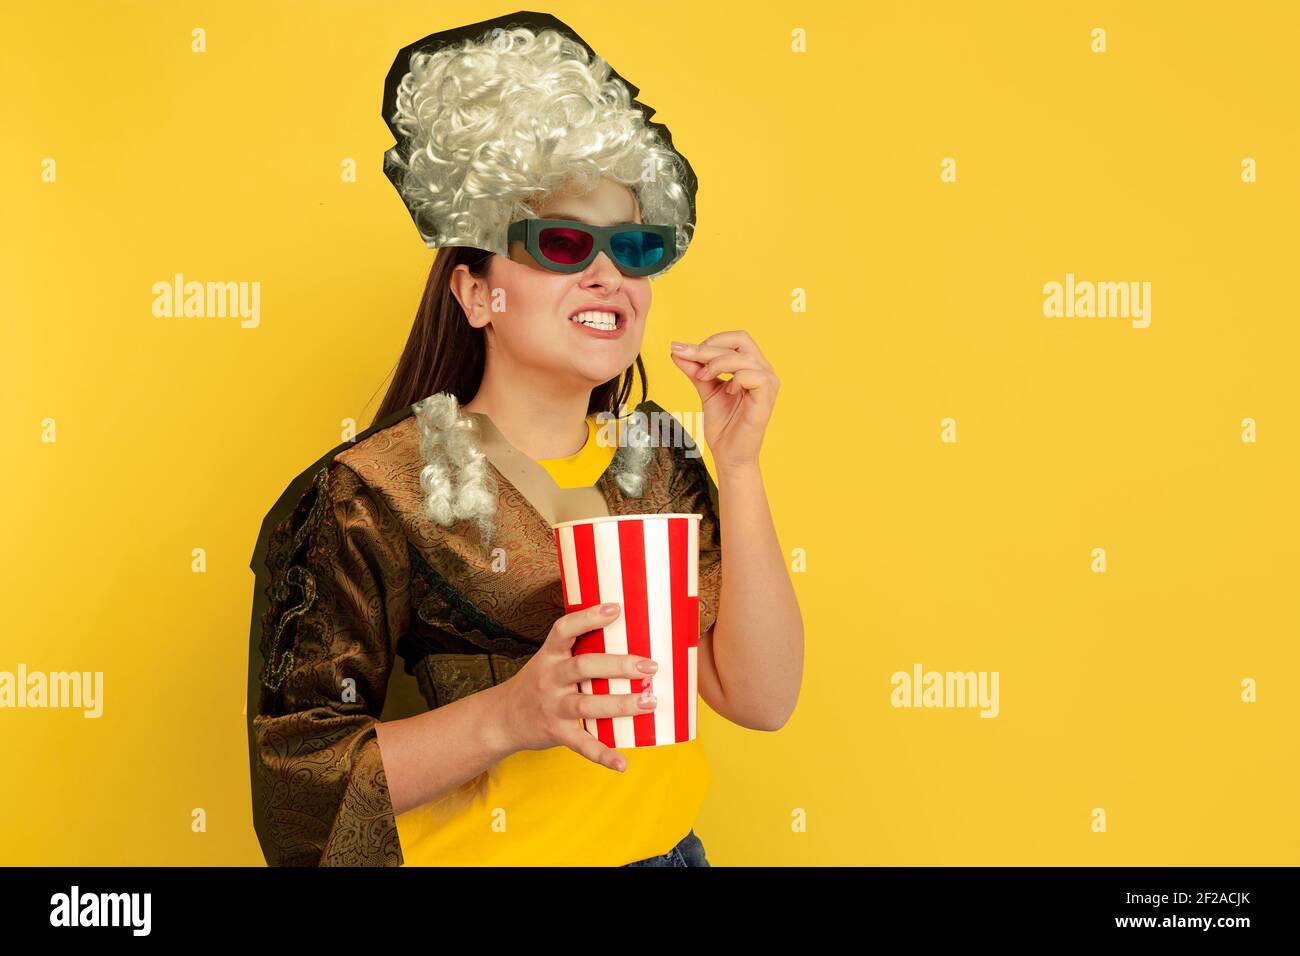 Cheering woman in movie. Magazine style collage with model outfit mixed of different eras. Copyspace for ad. Trendy colors, modern and vintage, renaissansse fashion. Cintemporary art collage. Stock Photo